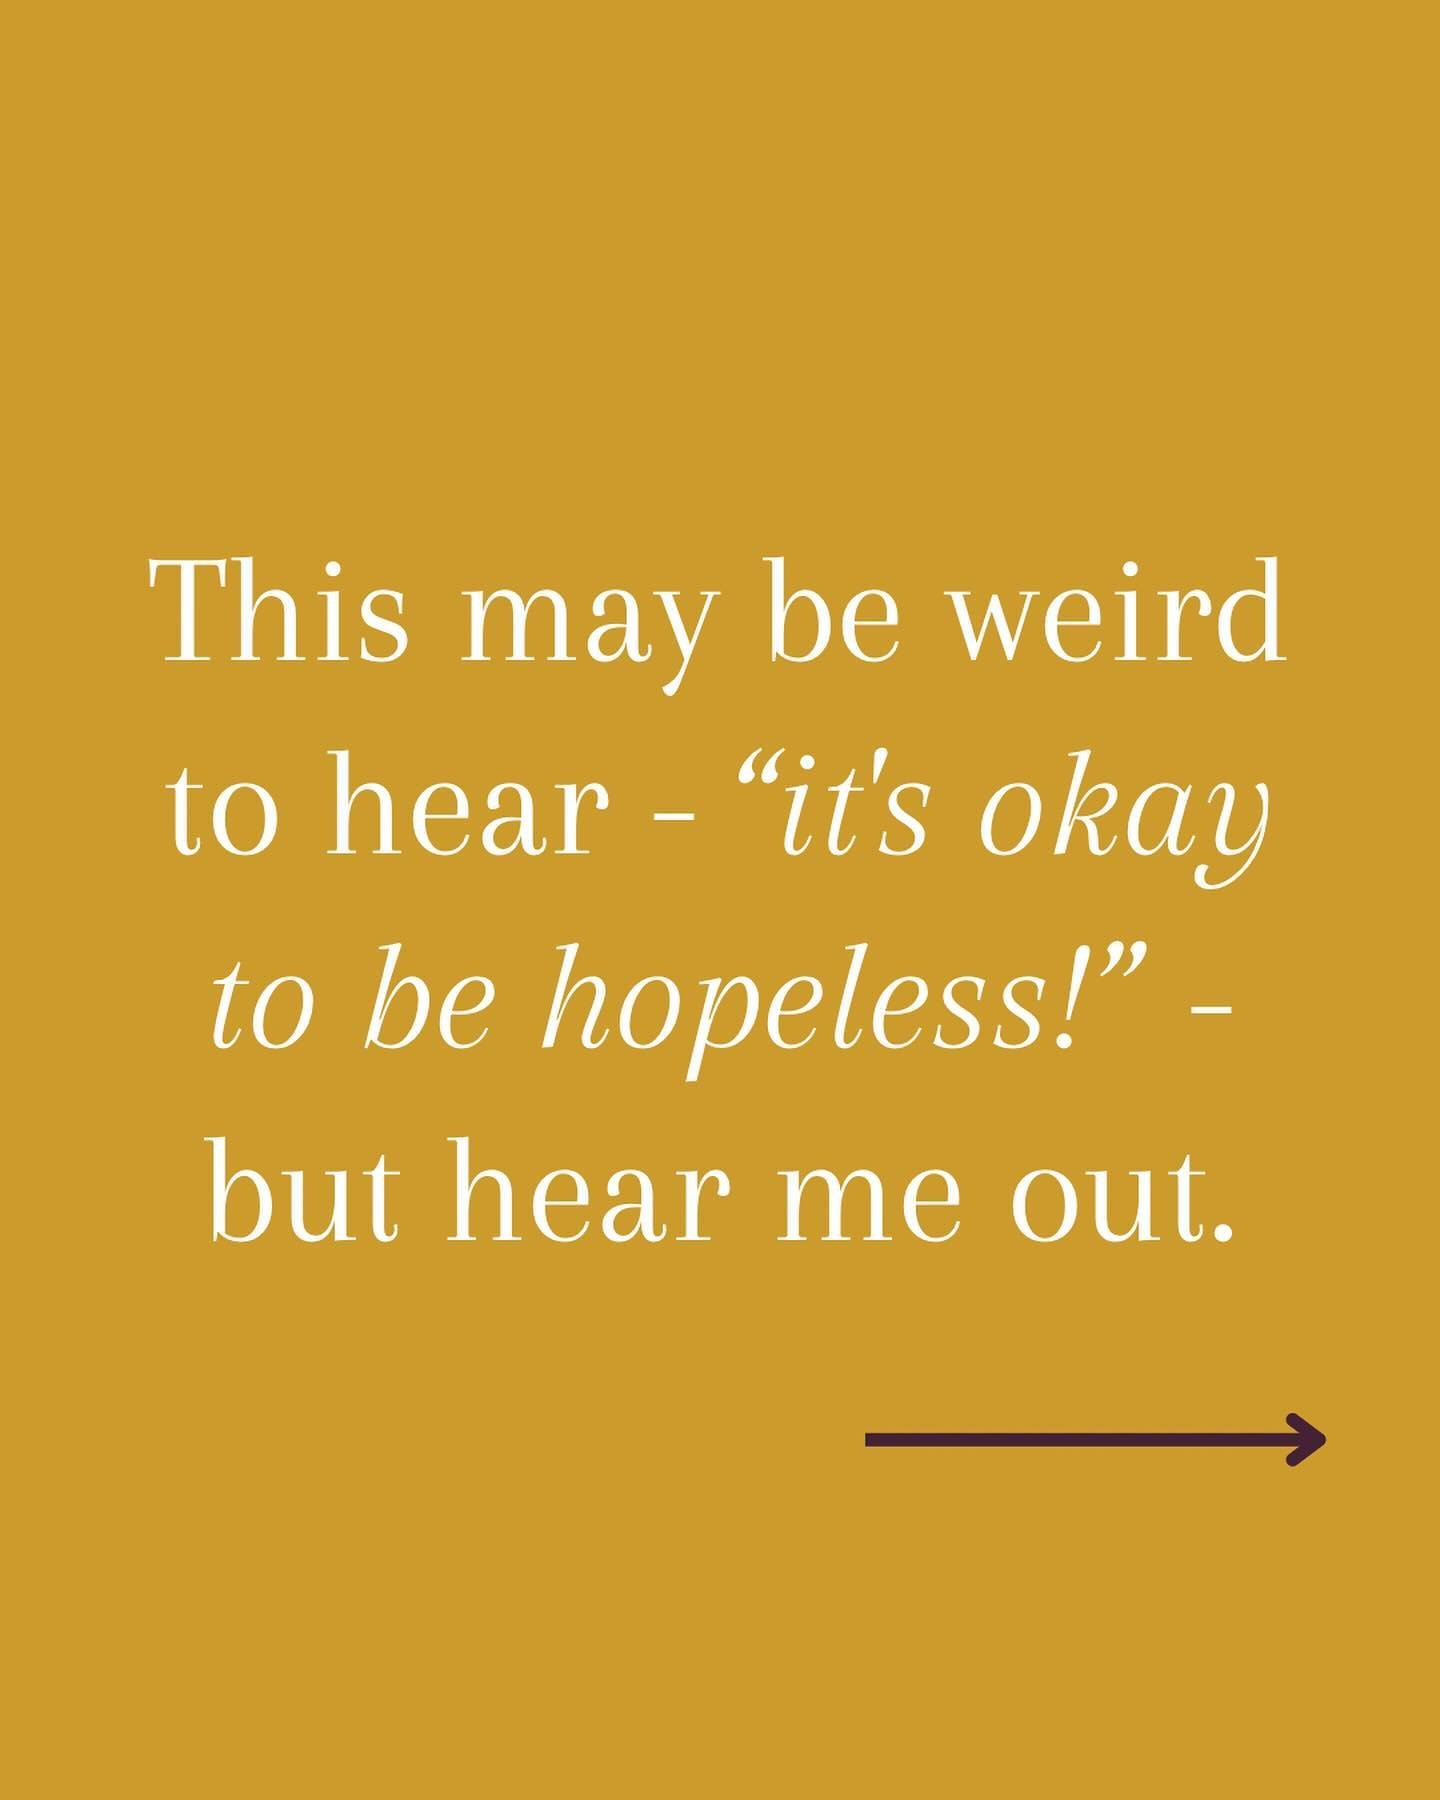 This may be weird to hear - &ldquo;it&rsquo;s okay to be hopeless!&rdquo; - but hear me out&hellip;

When we&rsquo;re at the end of ourselves, we&rsquo;re in a perfect place to experience God in a whole new way. 

I&rsquo;m sure you can think of vari